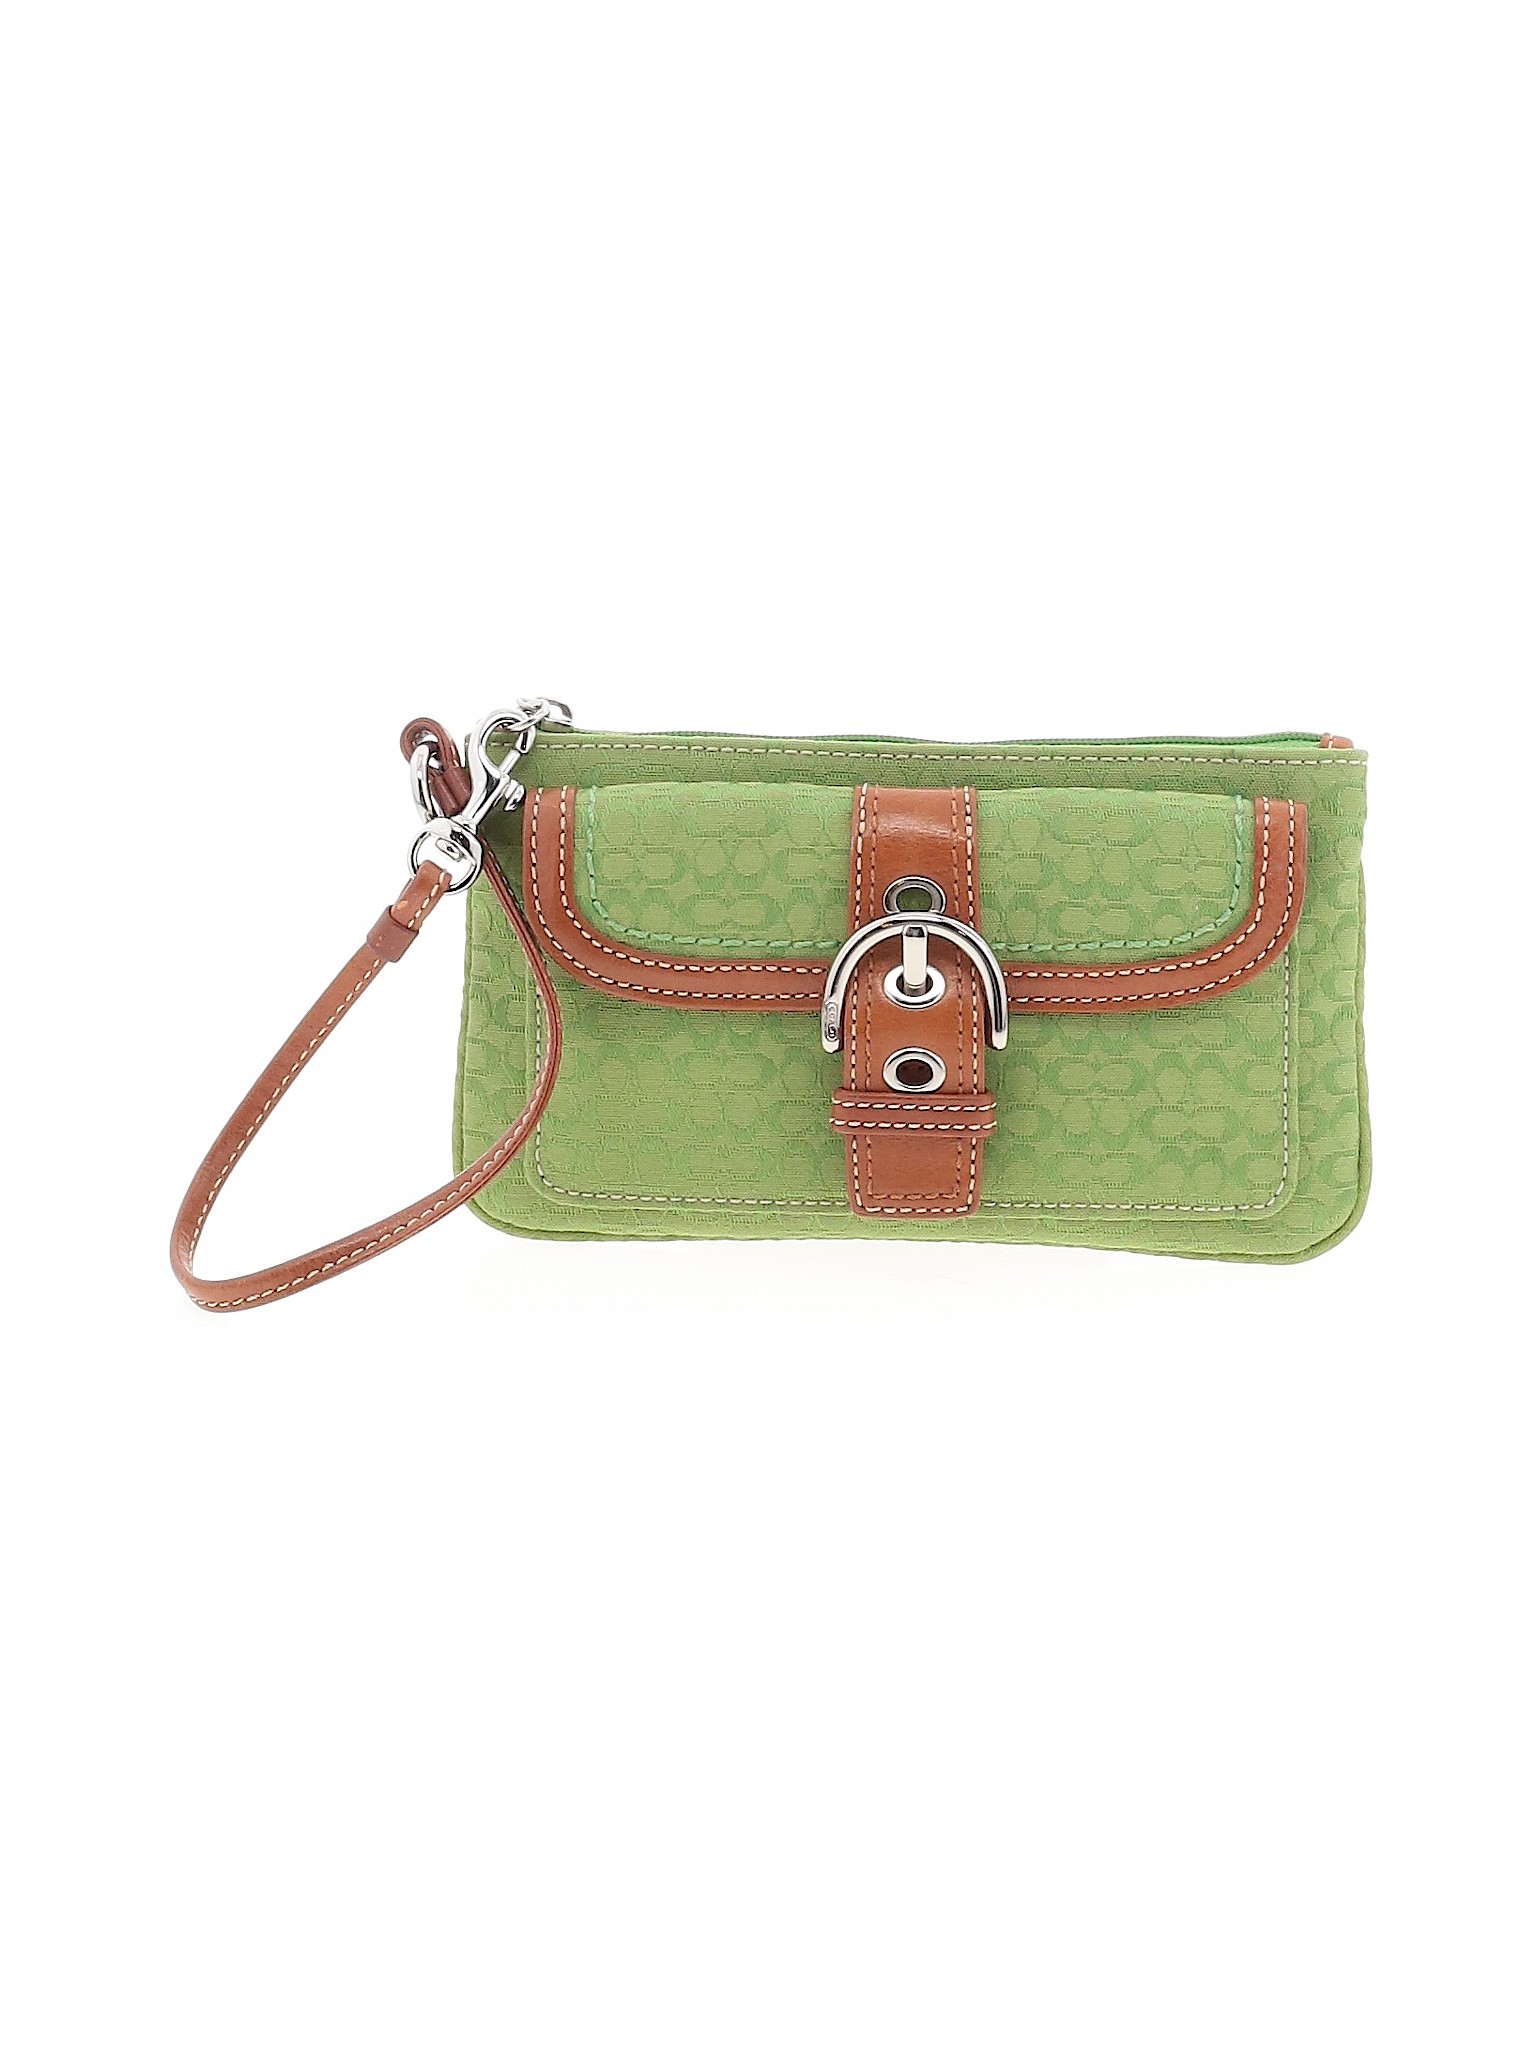 Coach Factory Wristlets On Sale Up To 90% Off Retail | thredUP